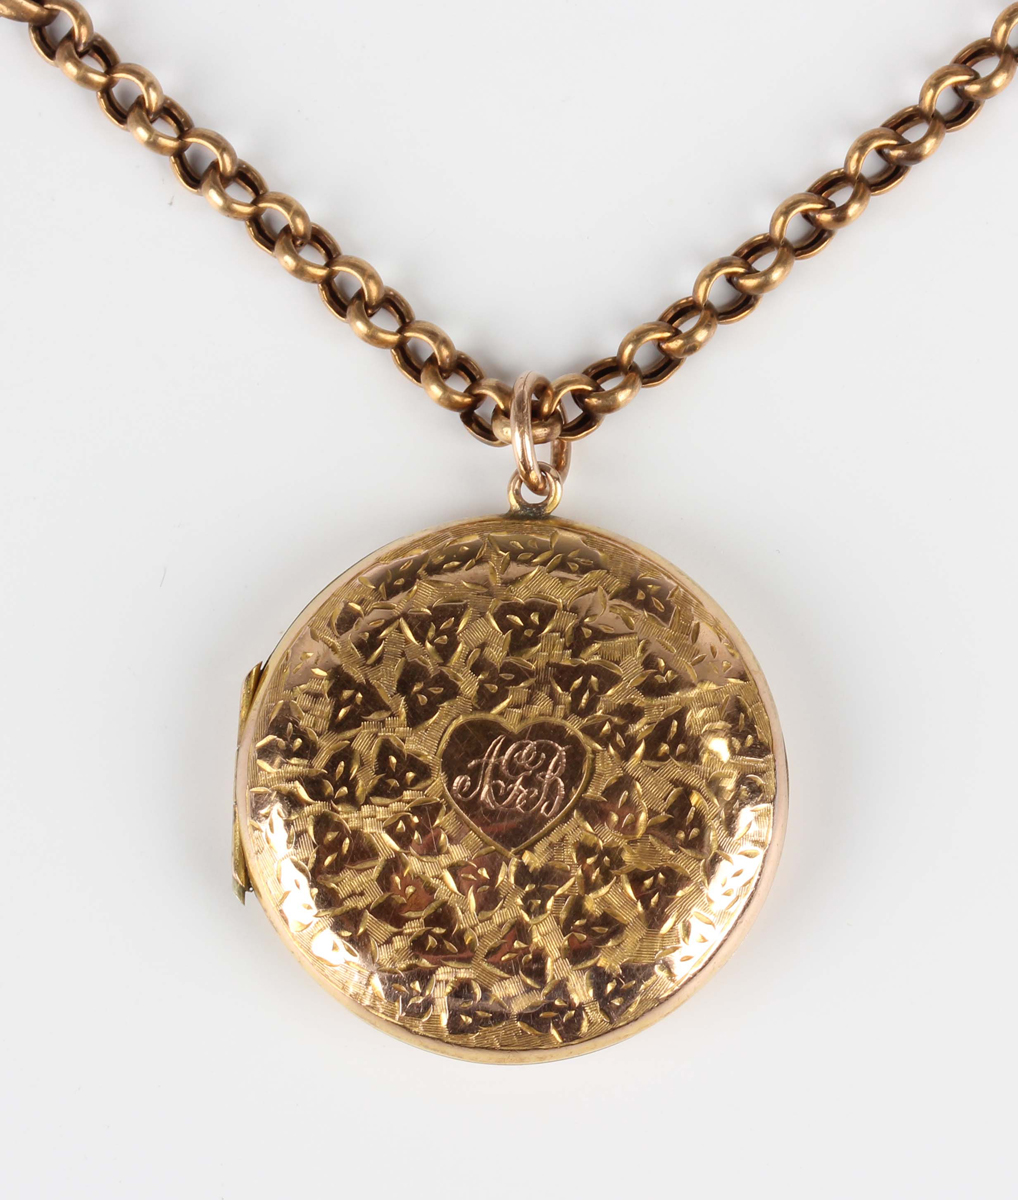 A gold back and front circular pendant locket with foliate engraved decoration, the front monogram